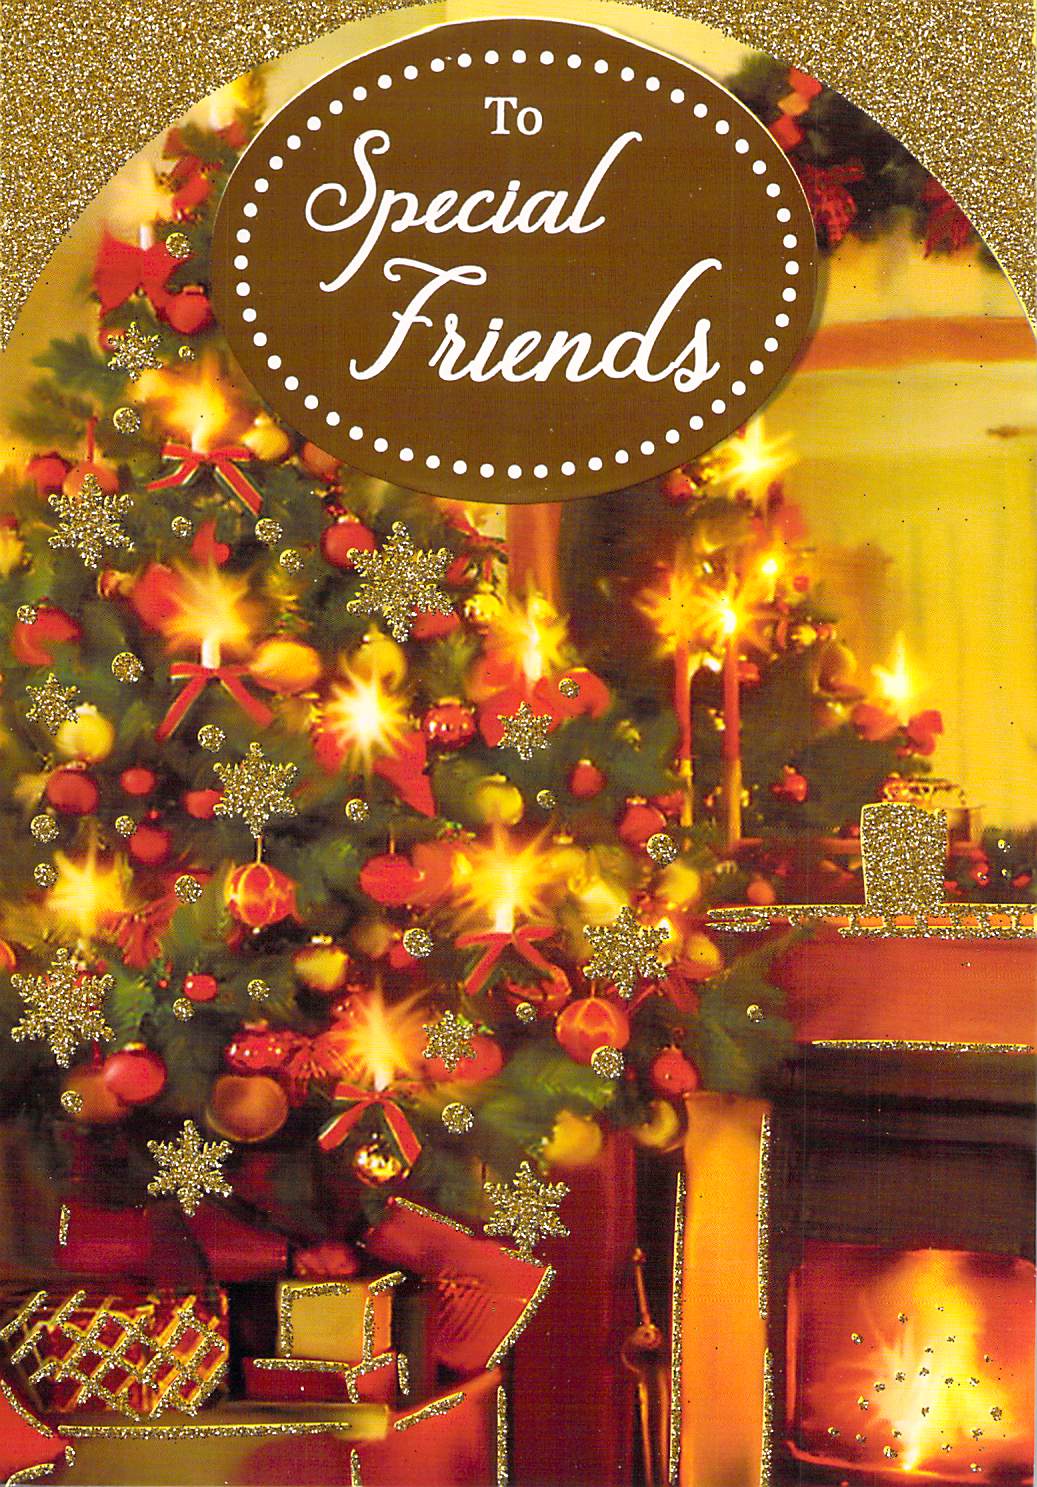 Friends - Christmas Greeting Card - Tree  - Multi Buy Discount